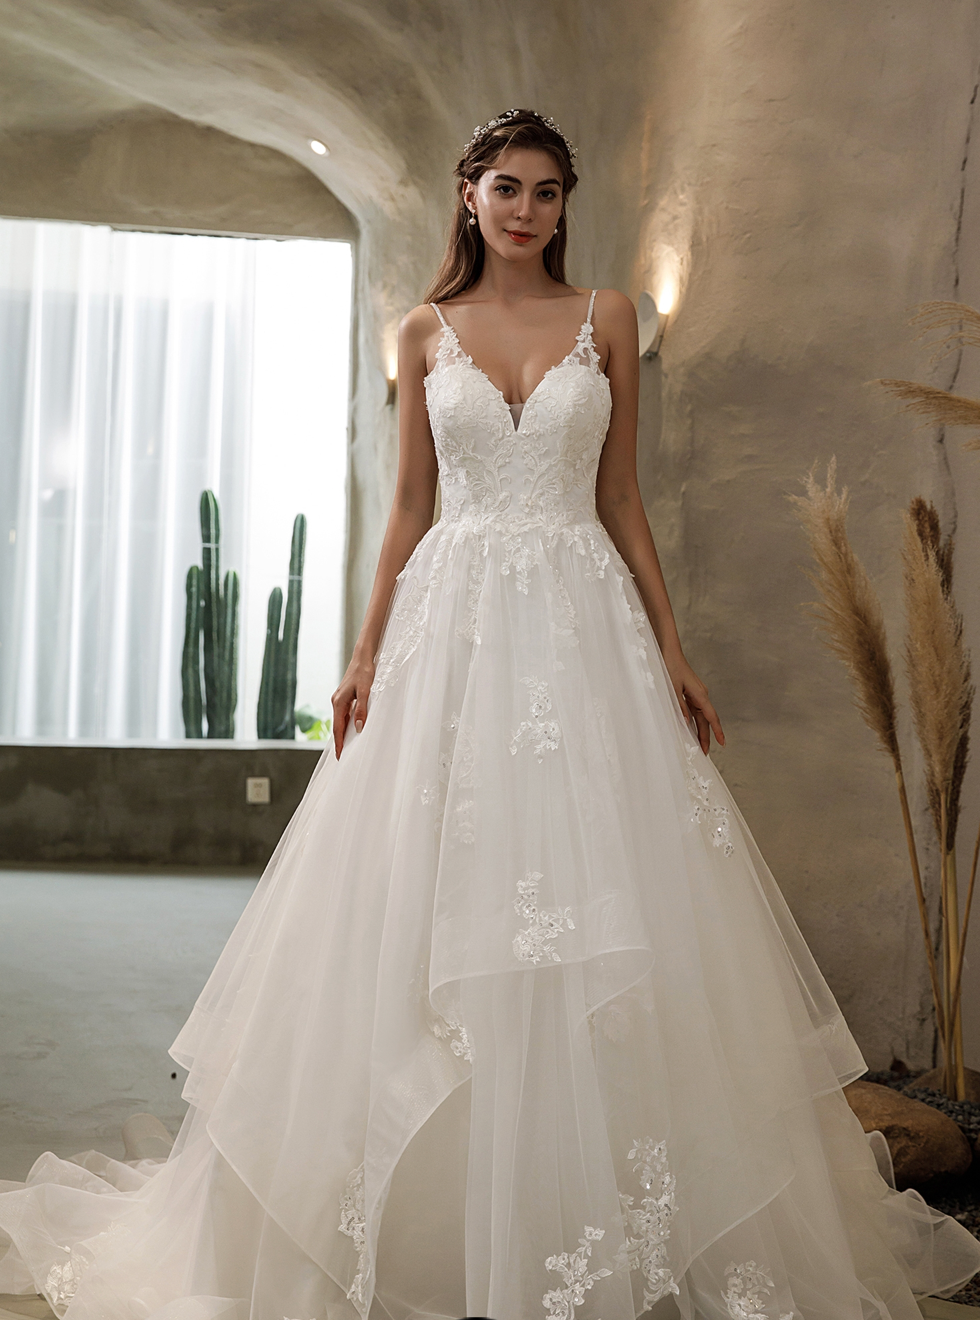 Ethereal Floral Lace Wedding Dress with Tiered Tulle Skirt